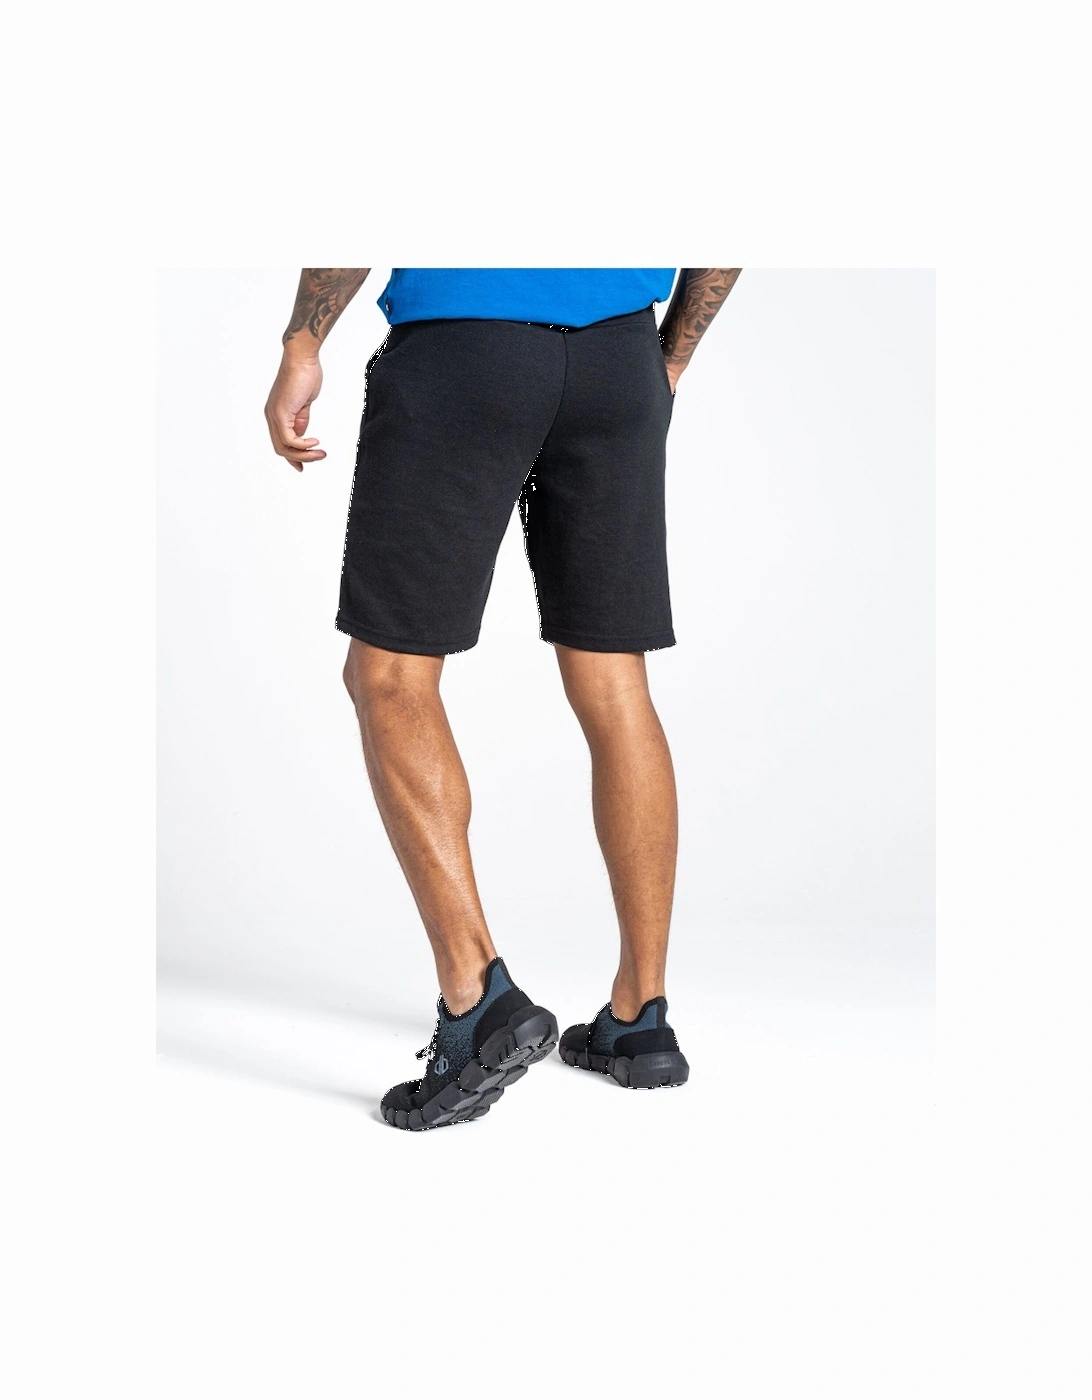 Mens Continual Cotton Athletic Sweat Shorts